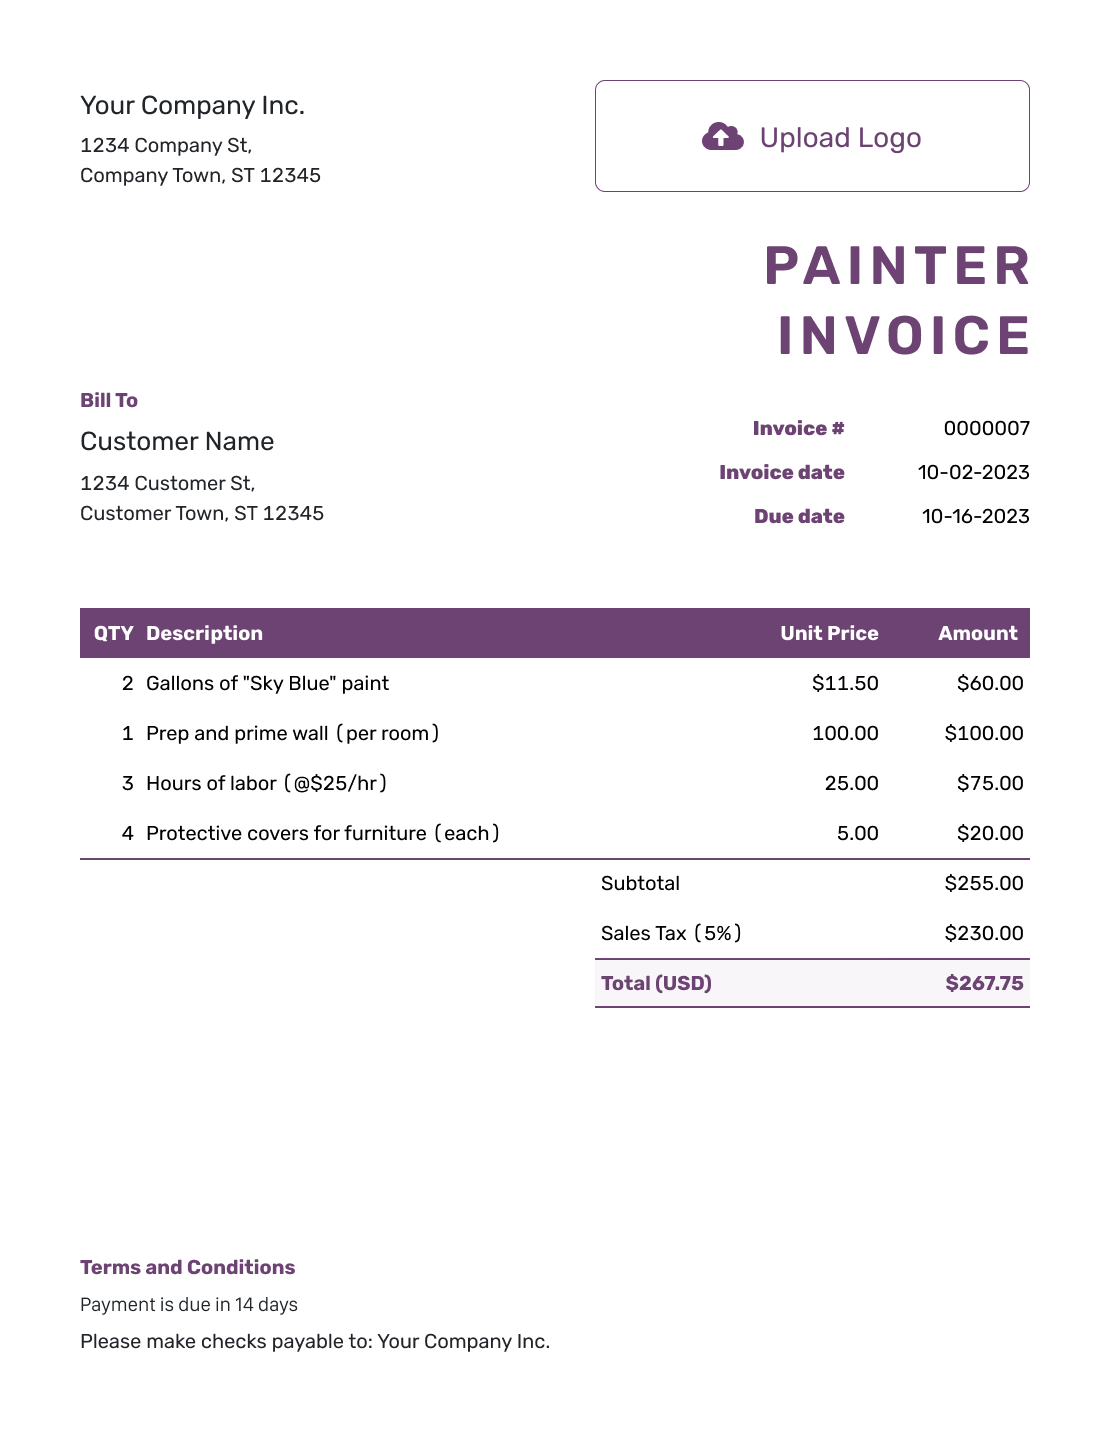 Free Painter Invoice Template